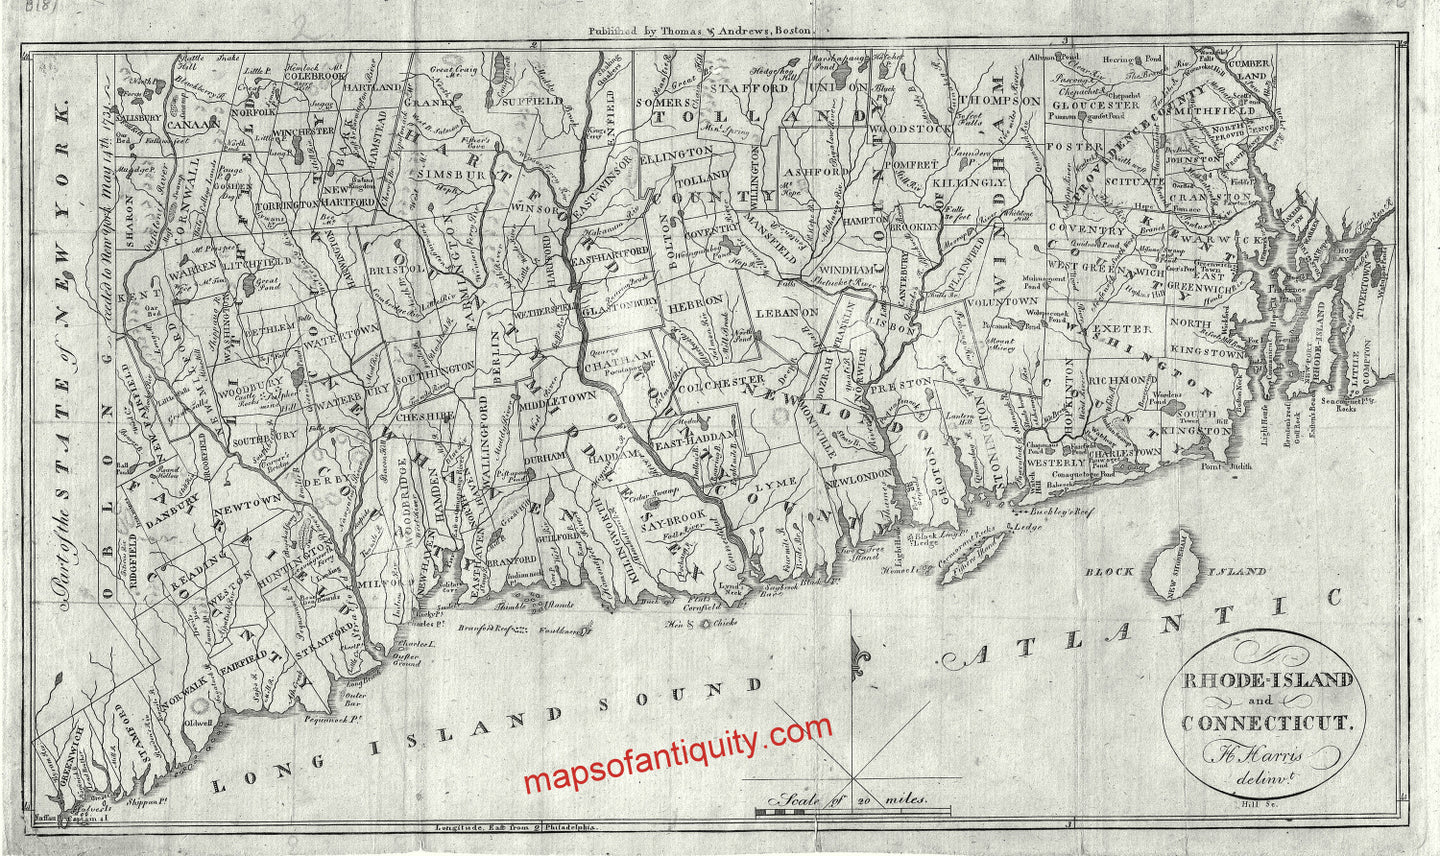 Black-and-White-Engraved-Antique-Map-Rhode-Island-and-Connecticut-Northeast-General-Rhode-Island-1802-Morse-Maps-Of-Antiquity